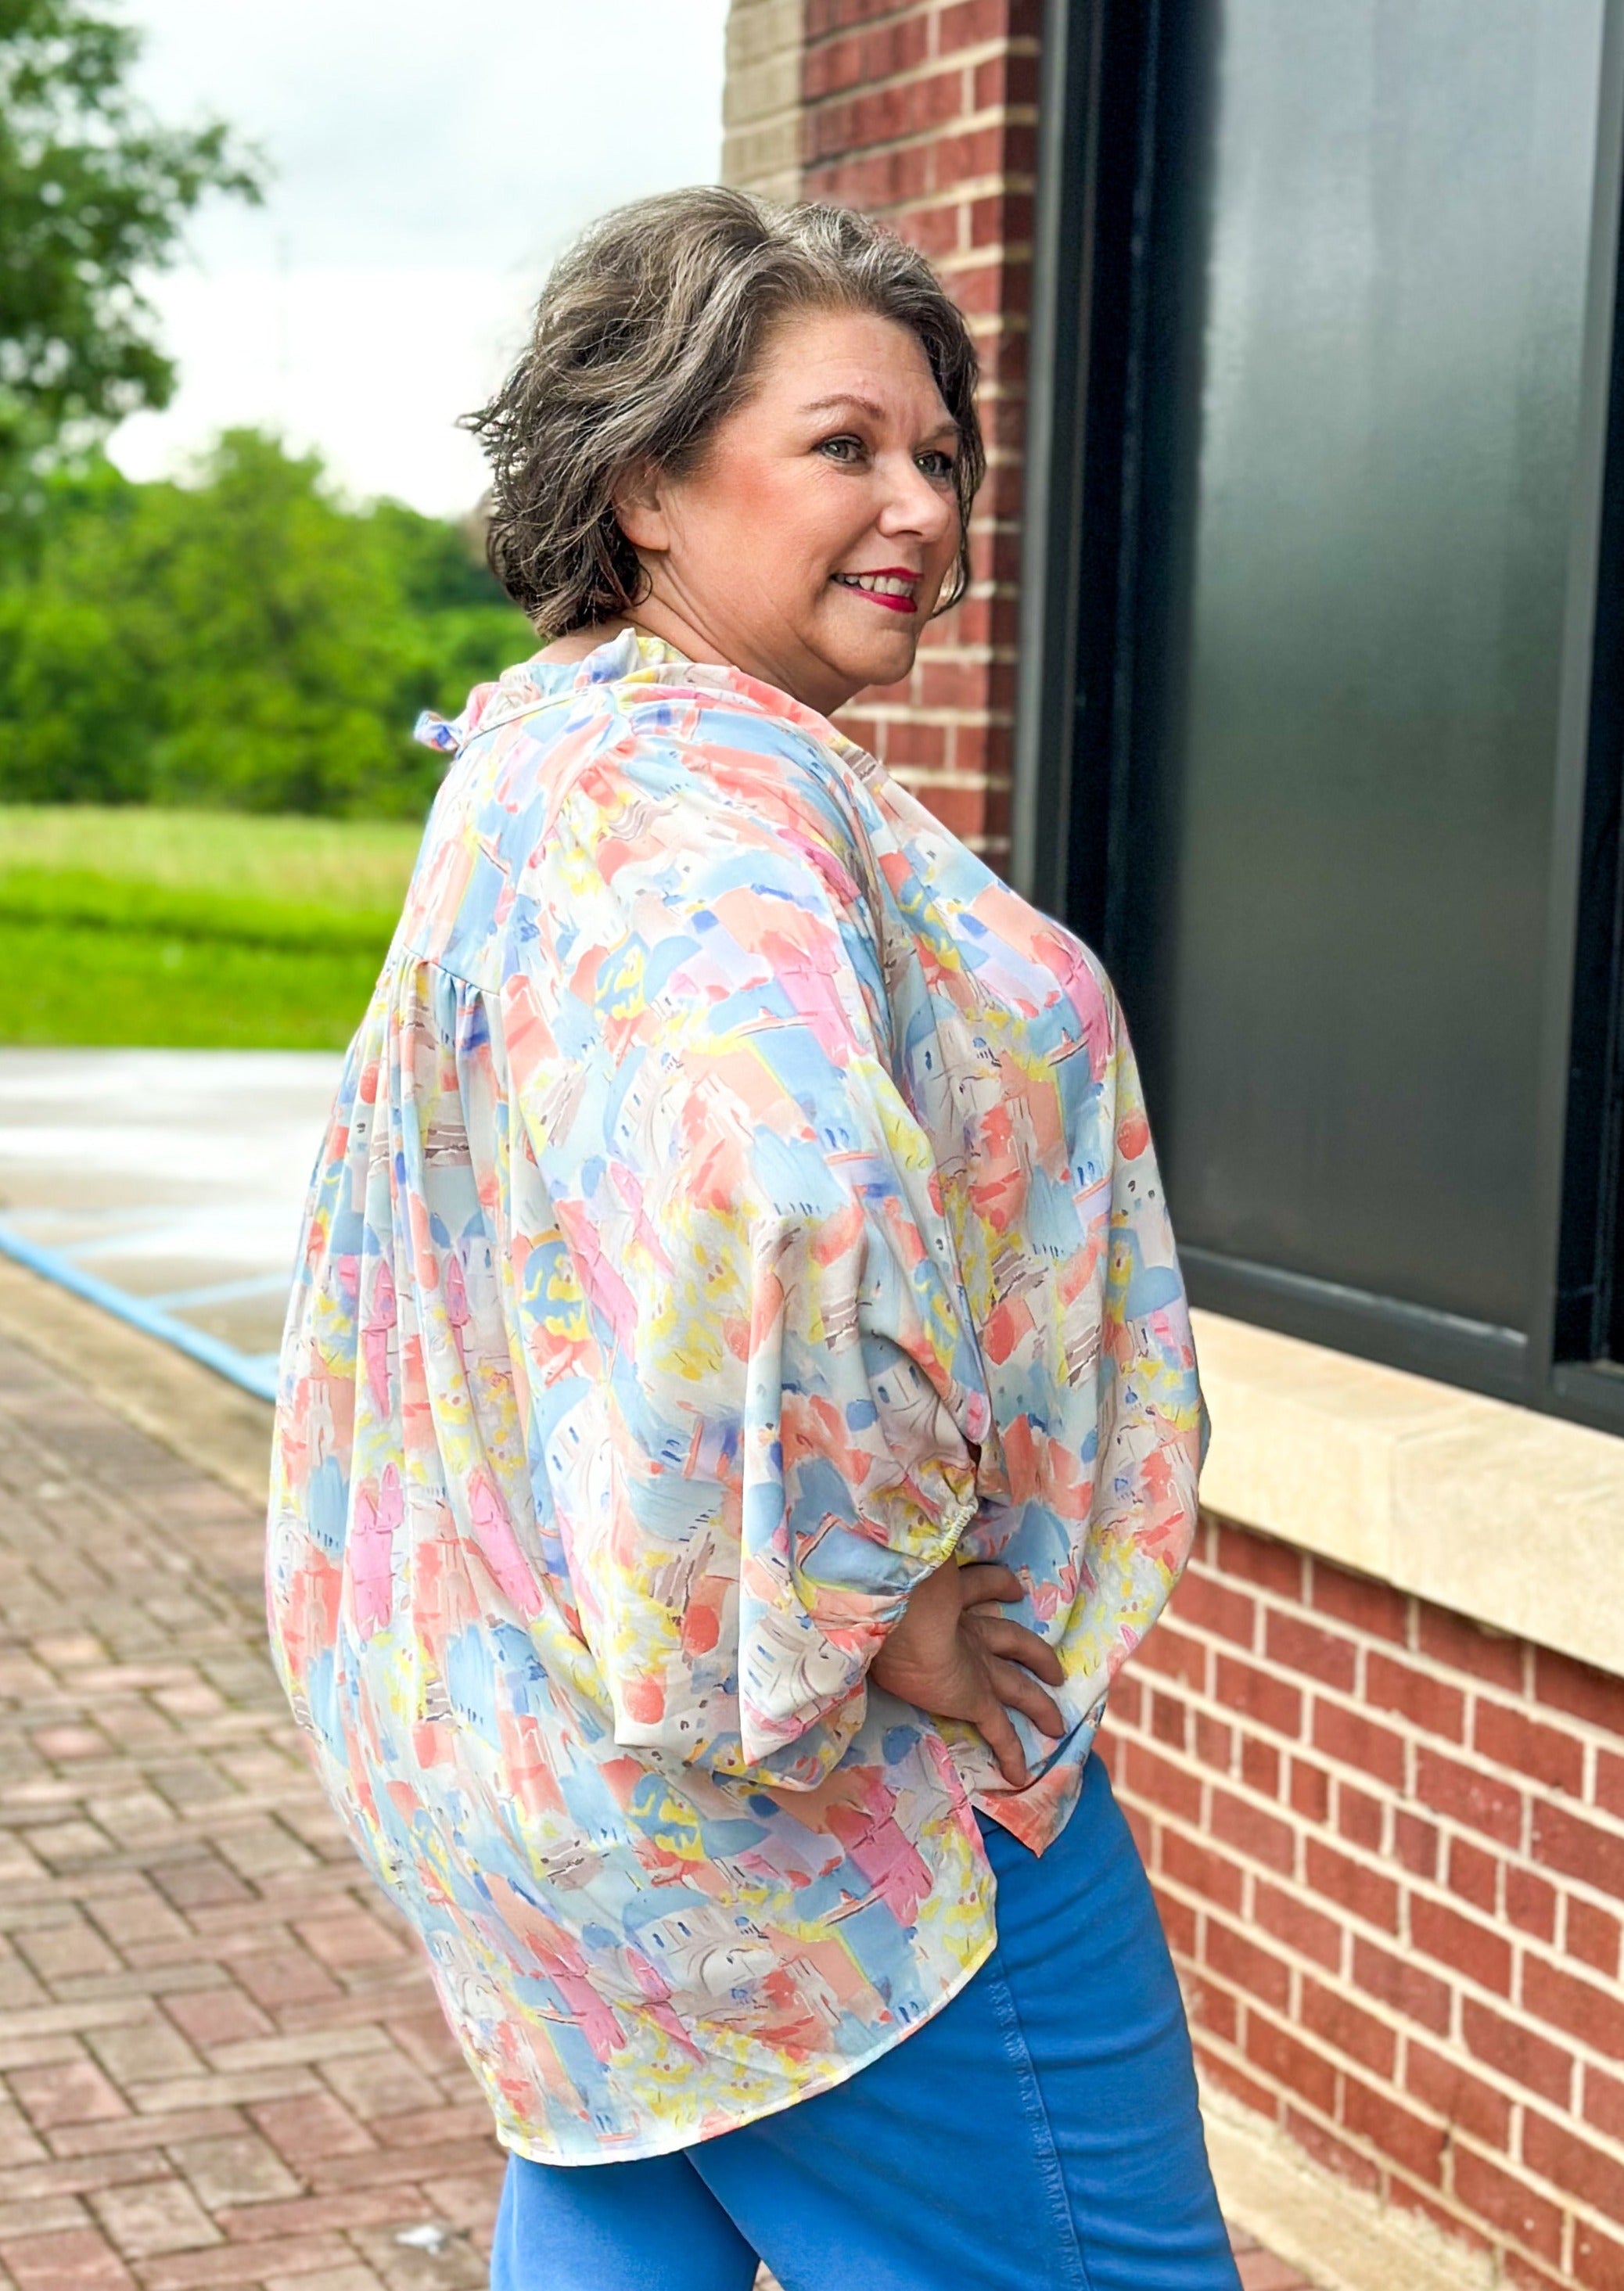 Pastel abstract print with building - v-neck with tie and ruffle - dolman 3/4 sleeve with elastic - lightweight